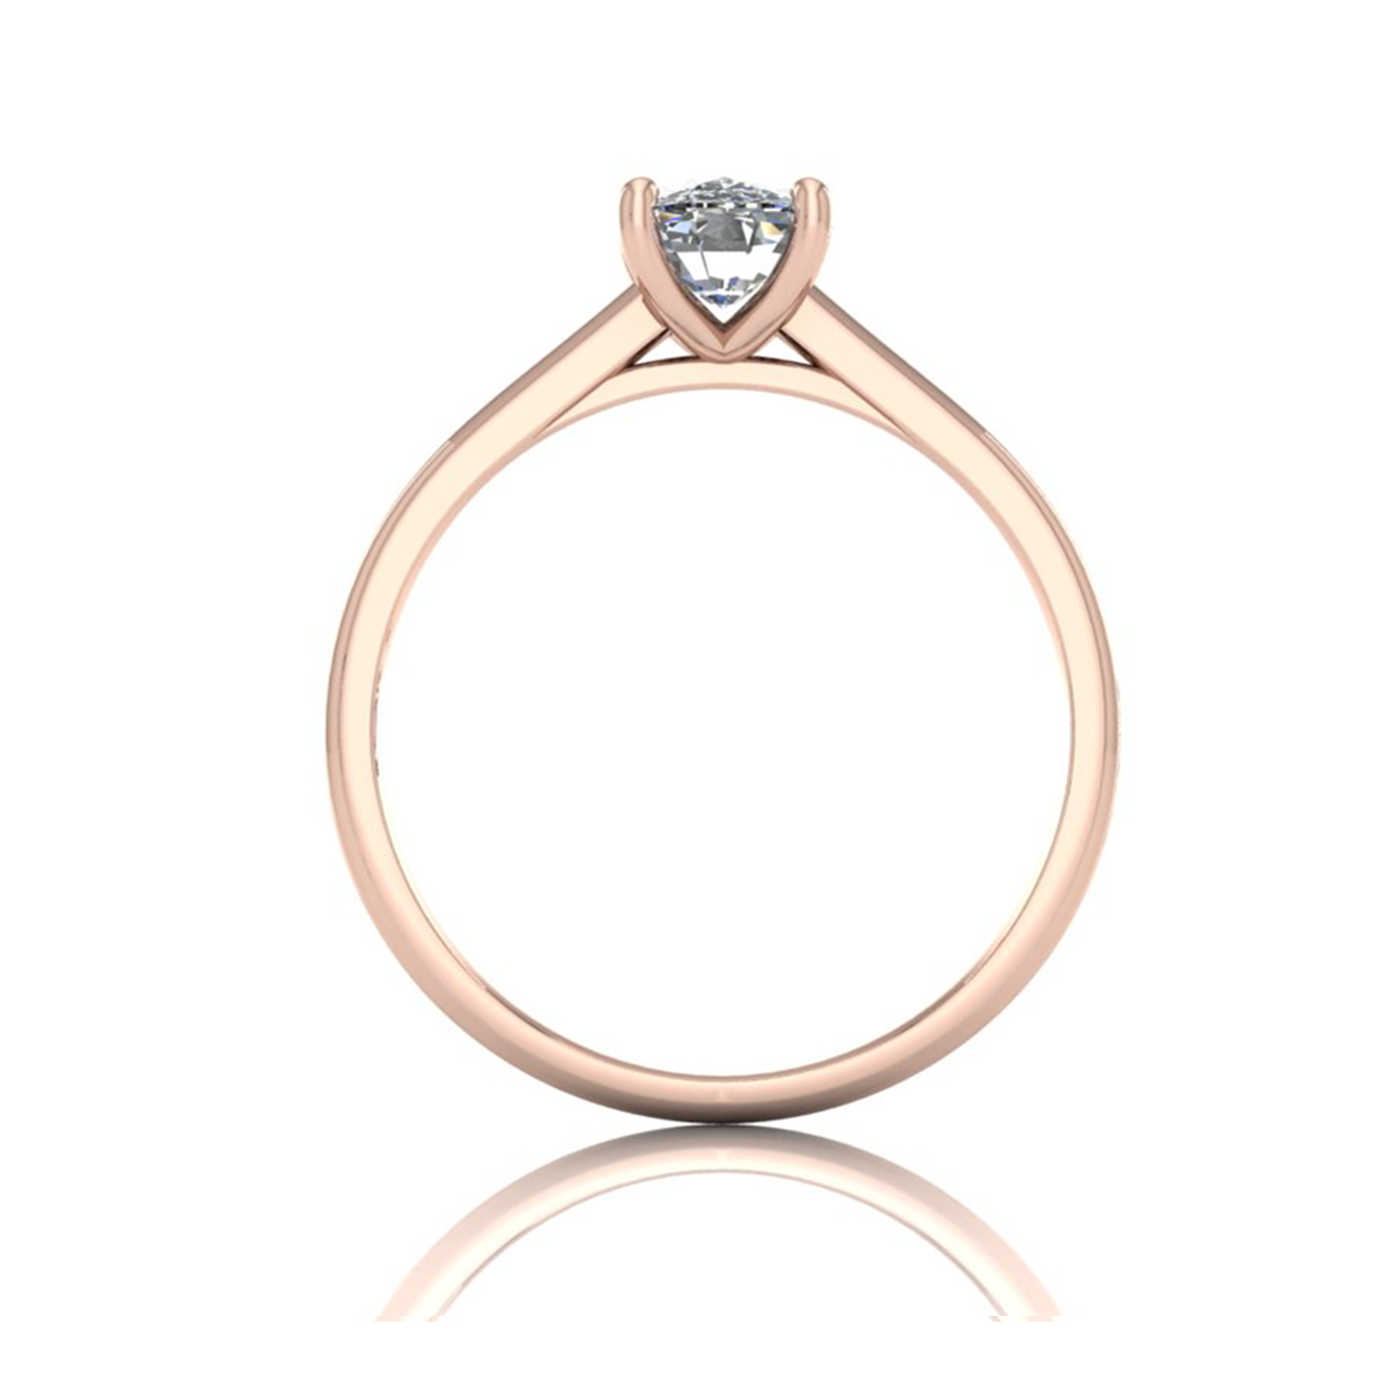 18k rose gold 1,20 ct 4 prongs solitaire elongated cushion cut diamond engagement ring with whisper thin band